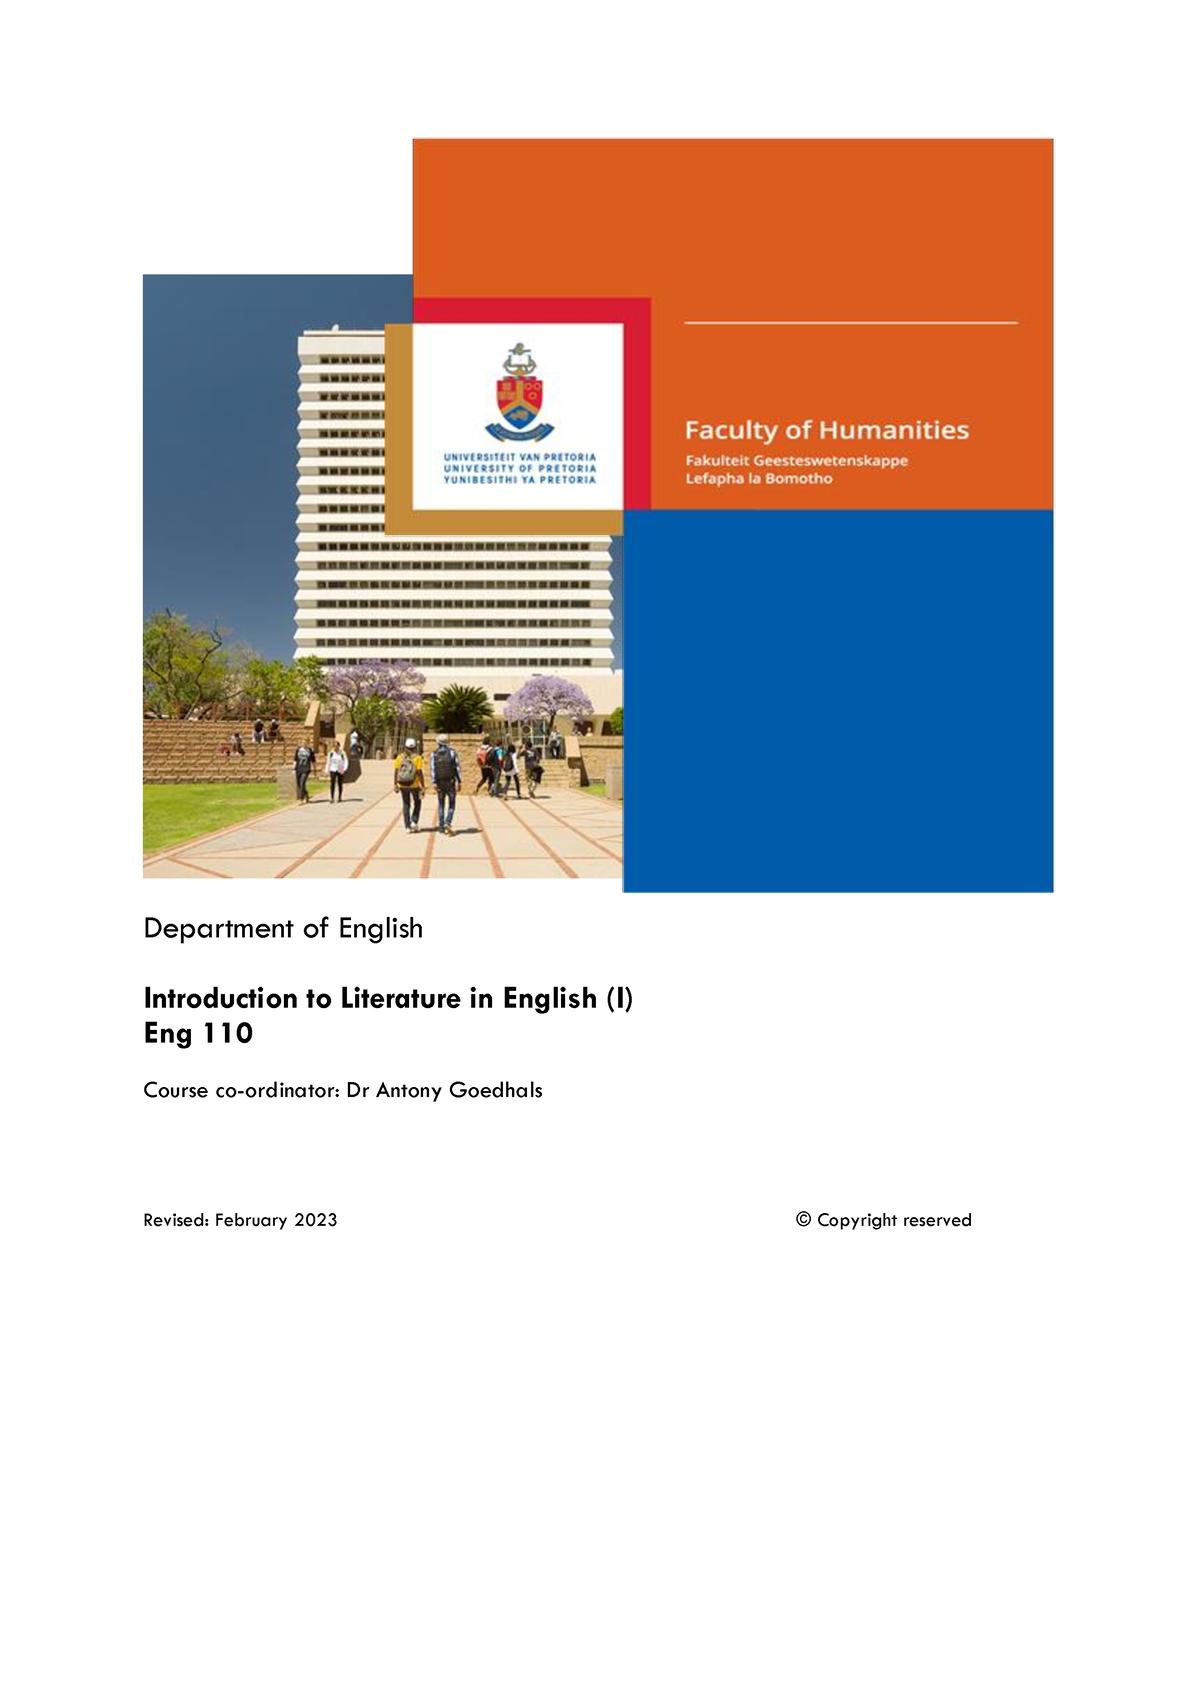 Eng 110 Study Guide Updated Feb 17 2023 Department Of English 